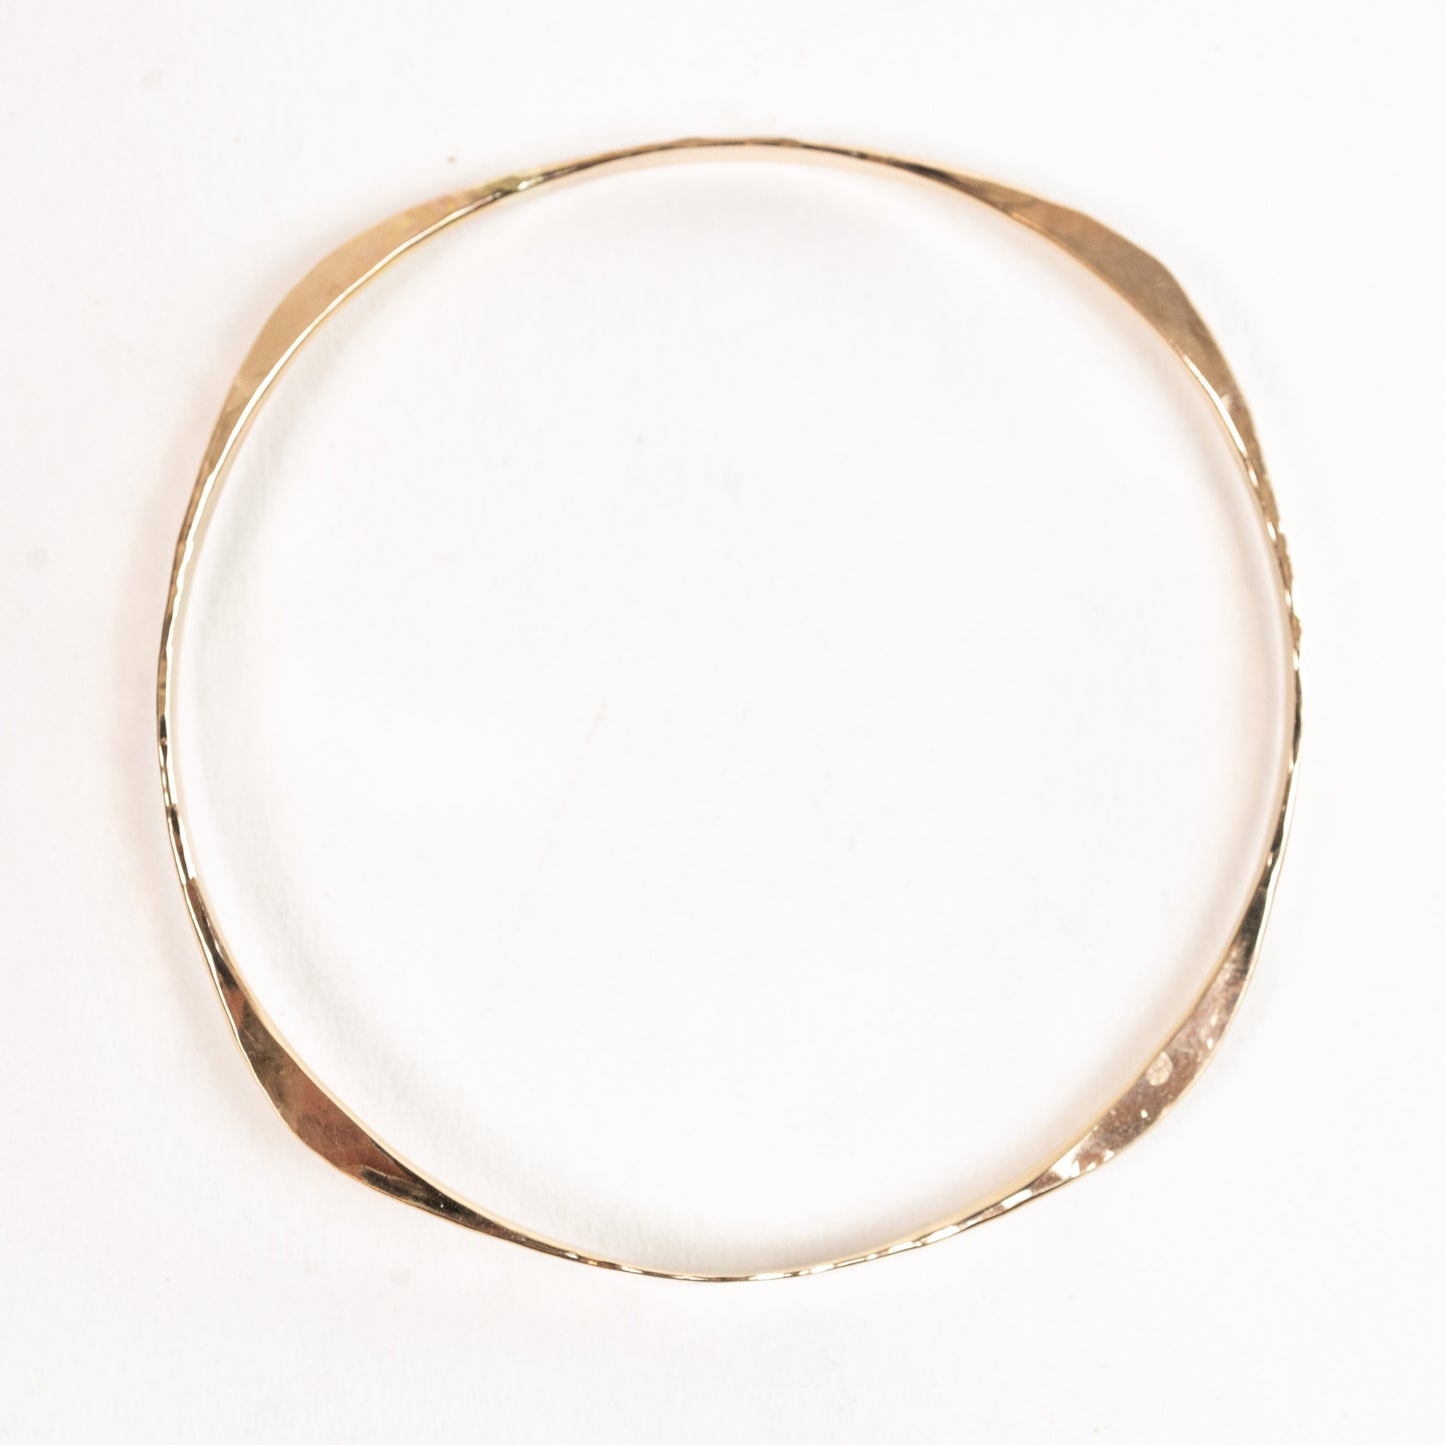 Bangle Bracelet - 14k Solid Yellow Gold - Four Way hand forged